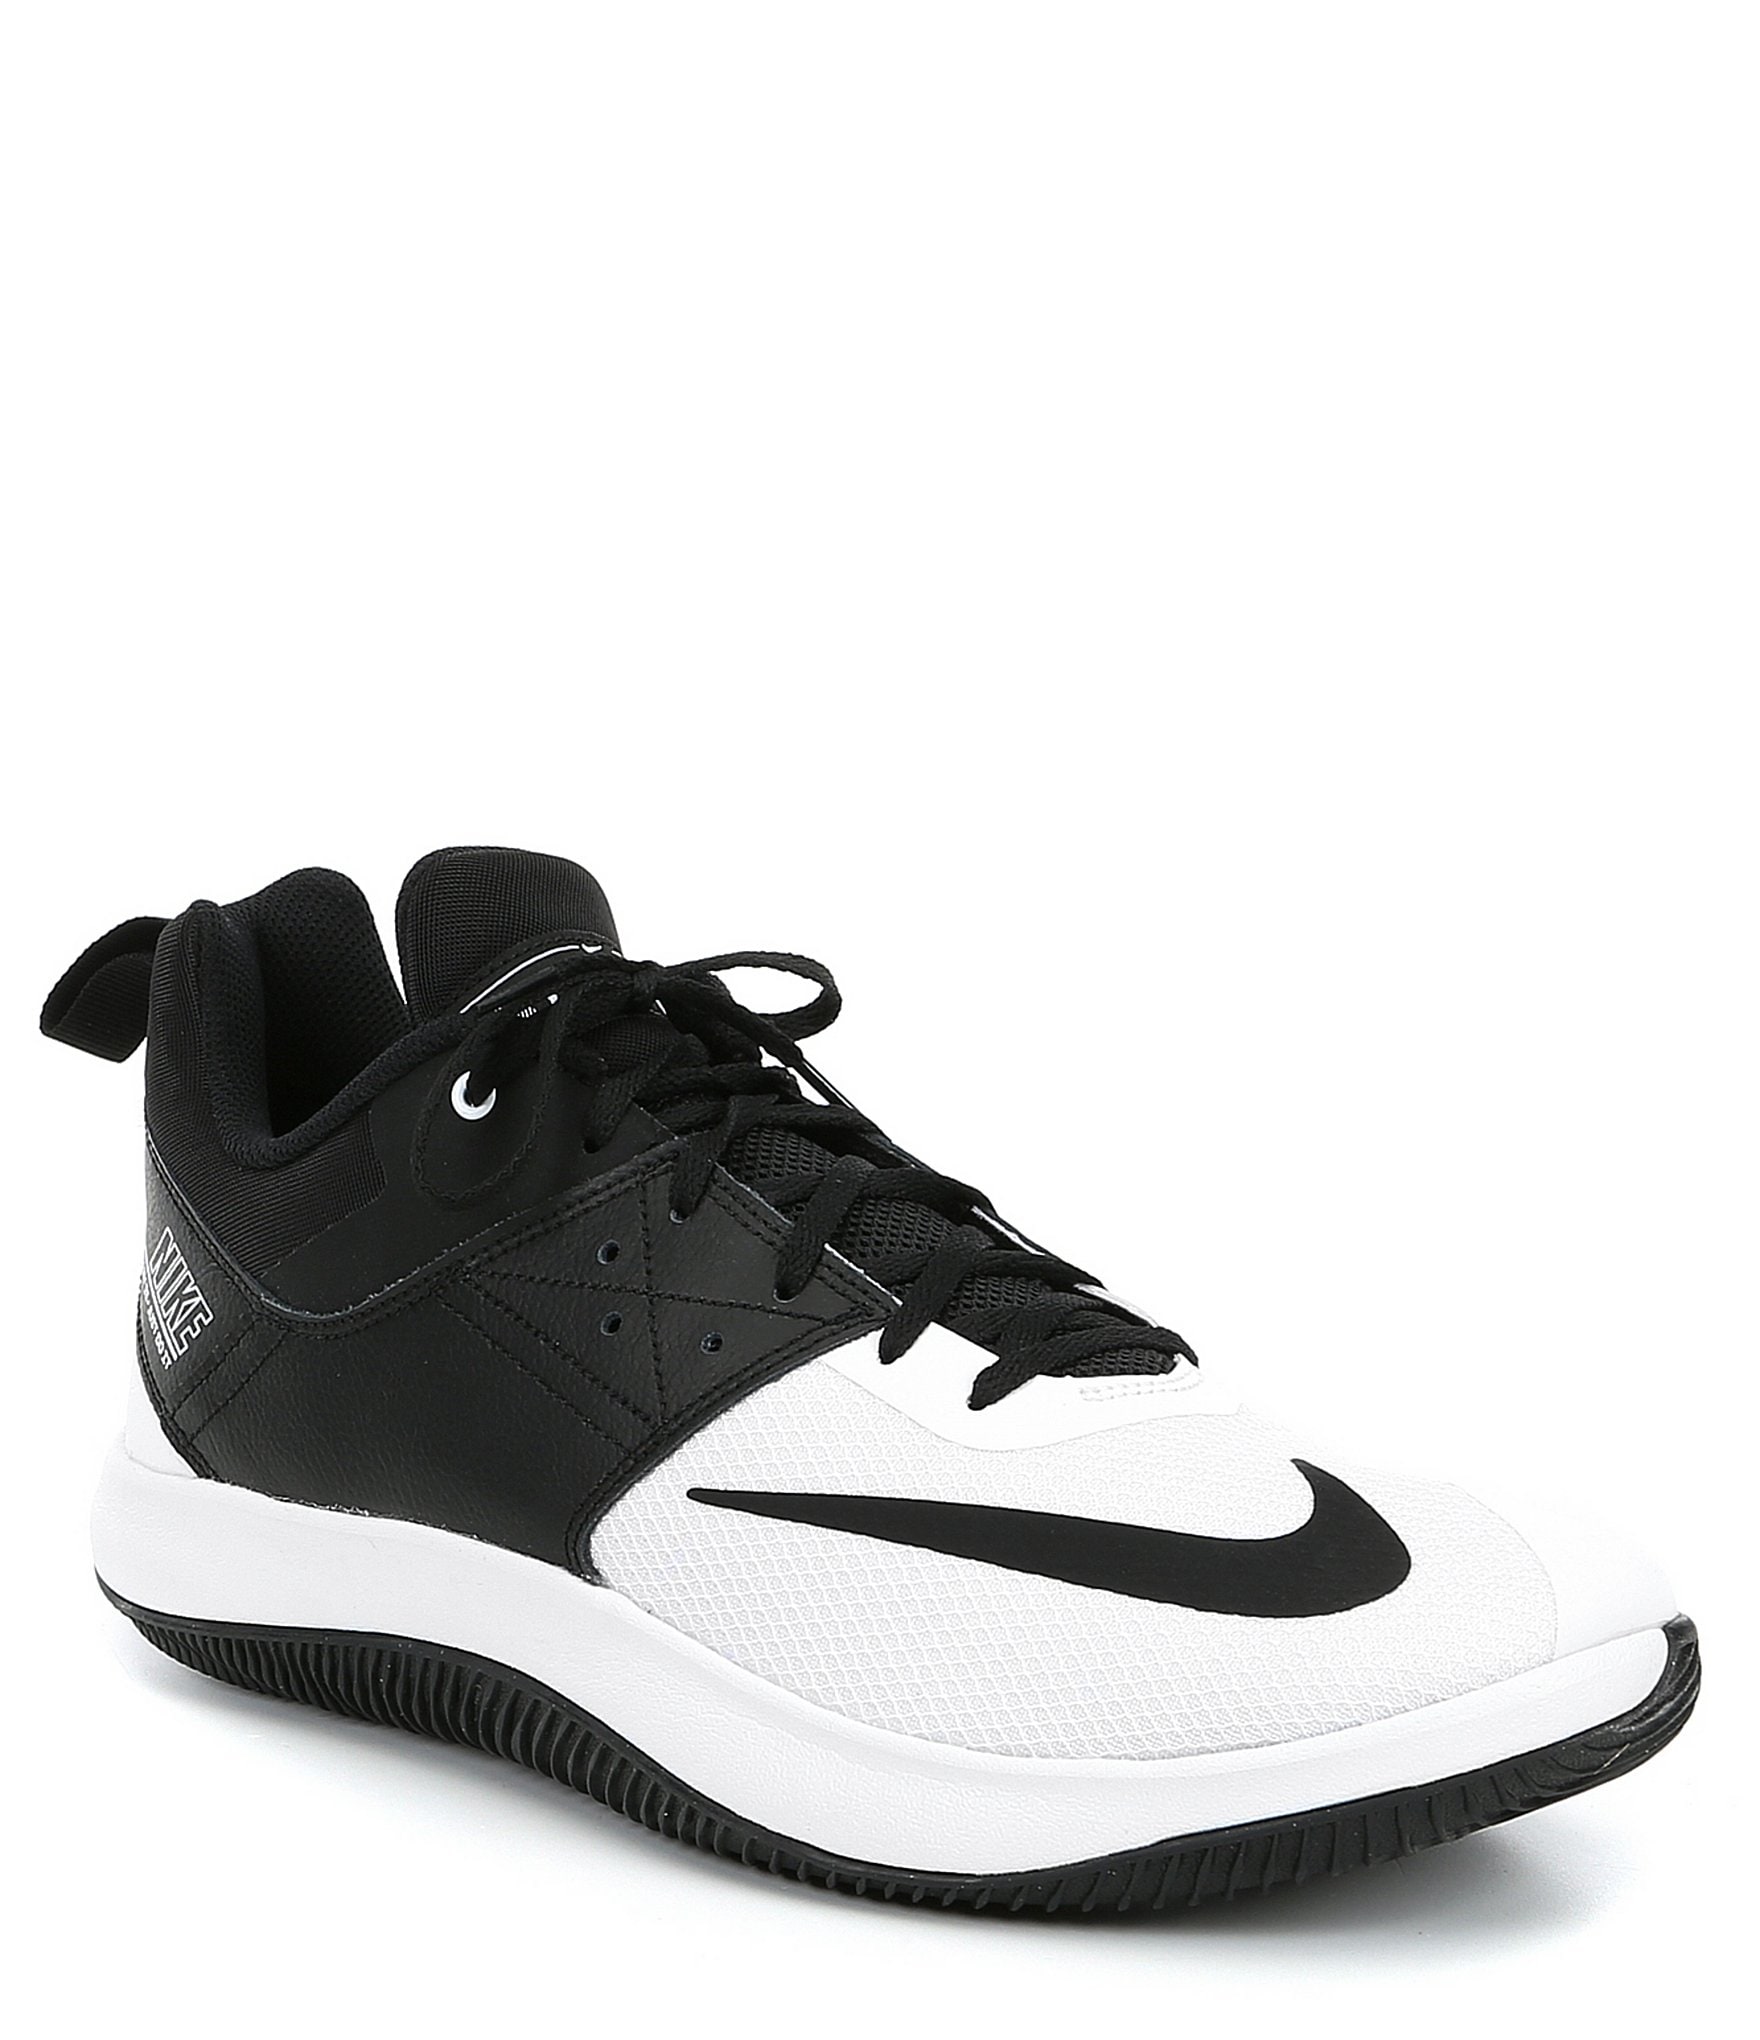 nike flyby low mens basketball shoes